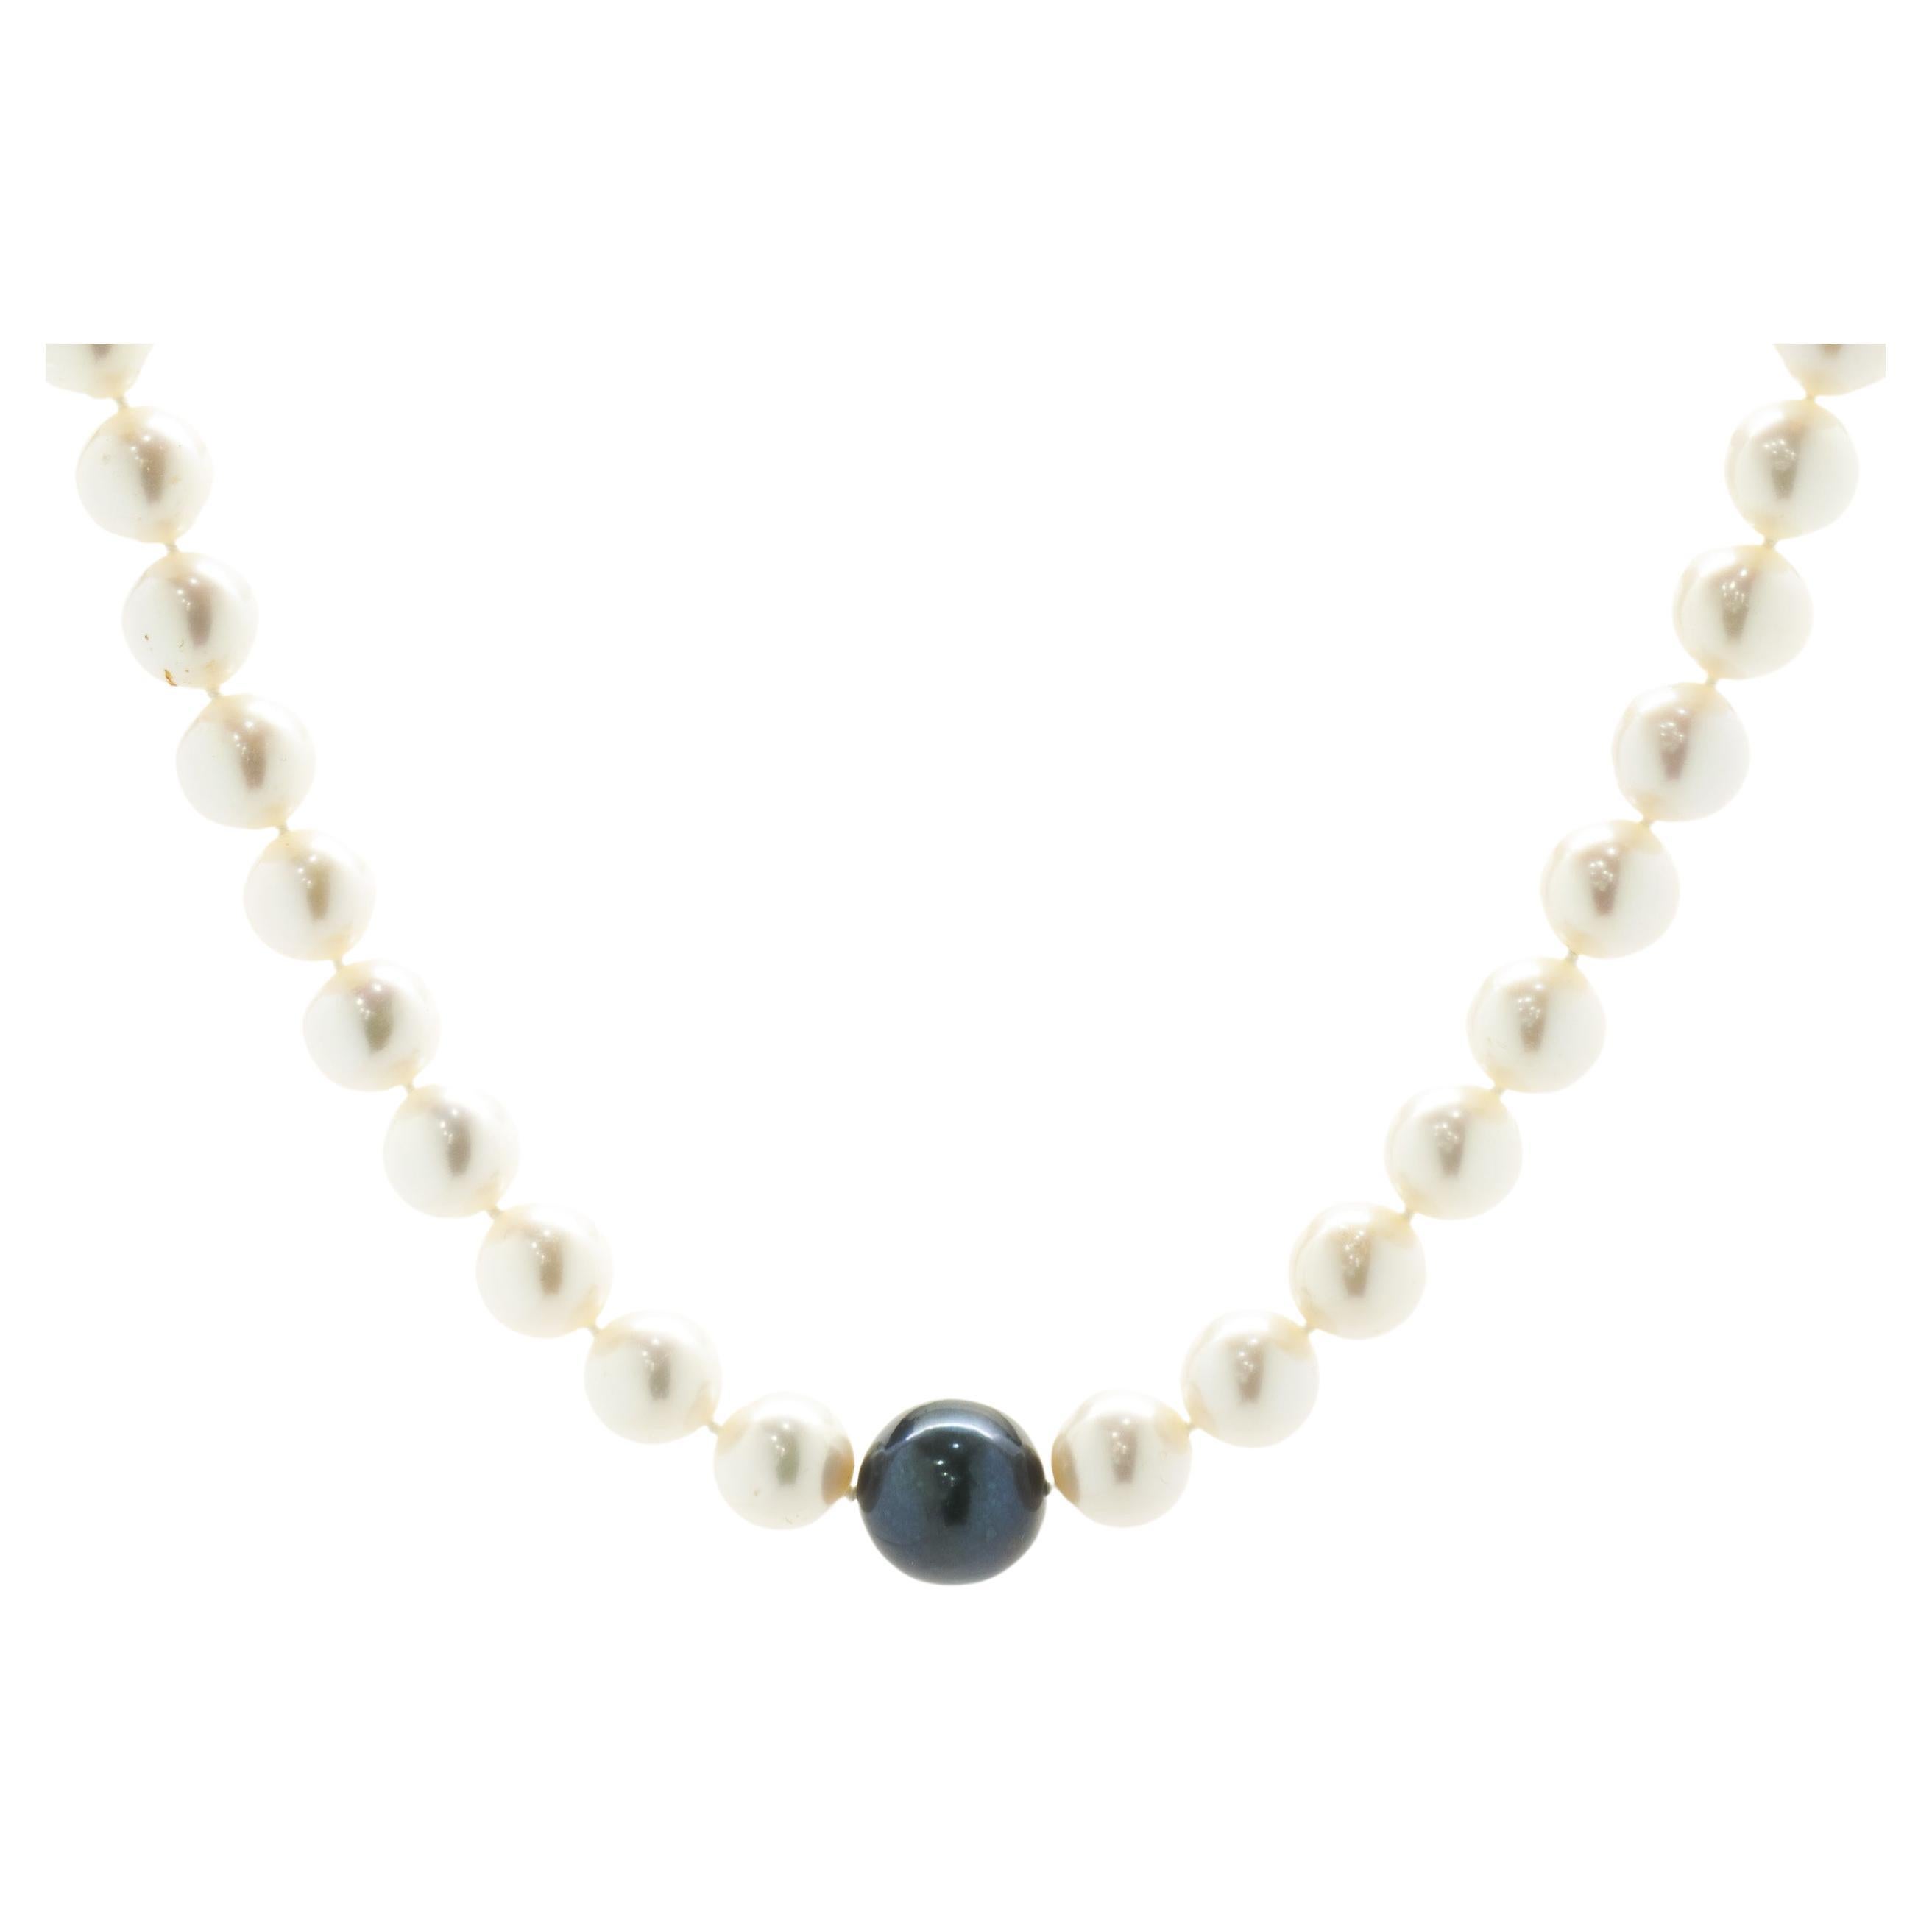 Sterling Silver Freshwater Pearl Necklace with Blue / Black Center